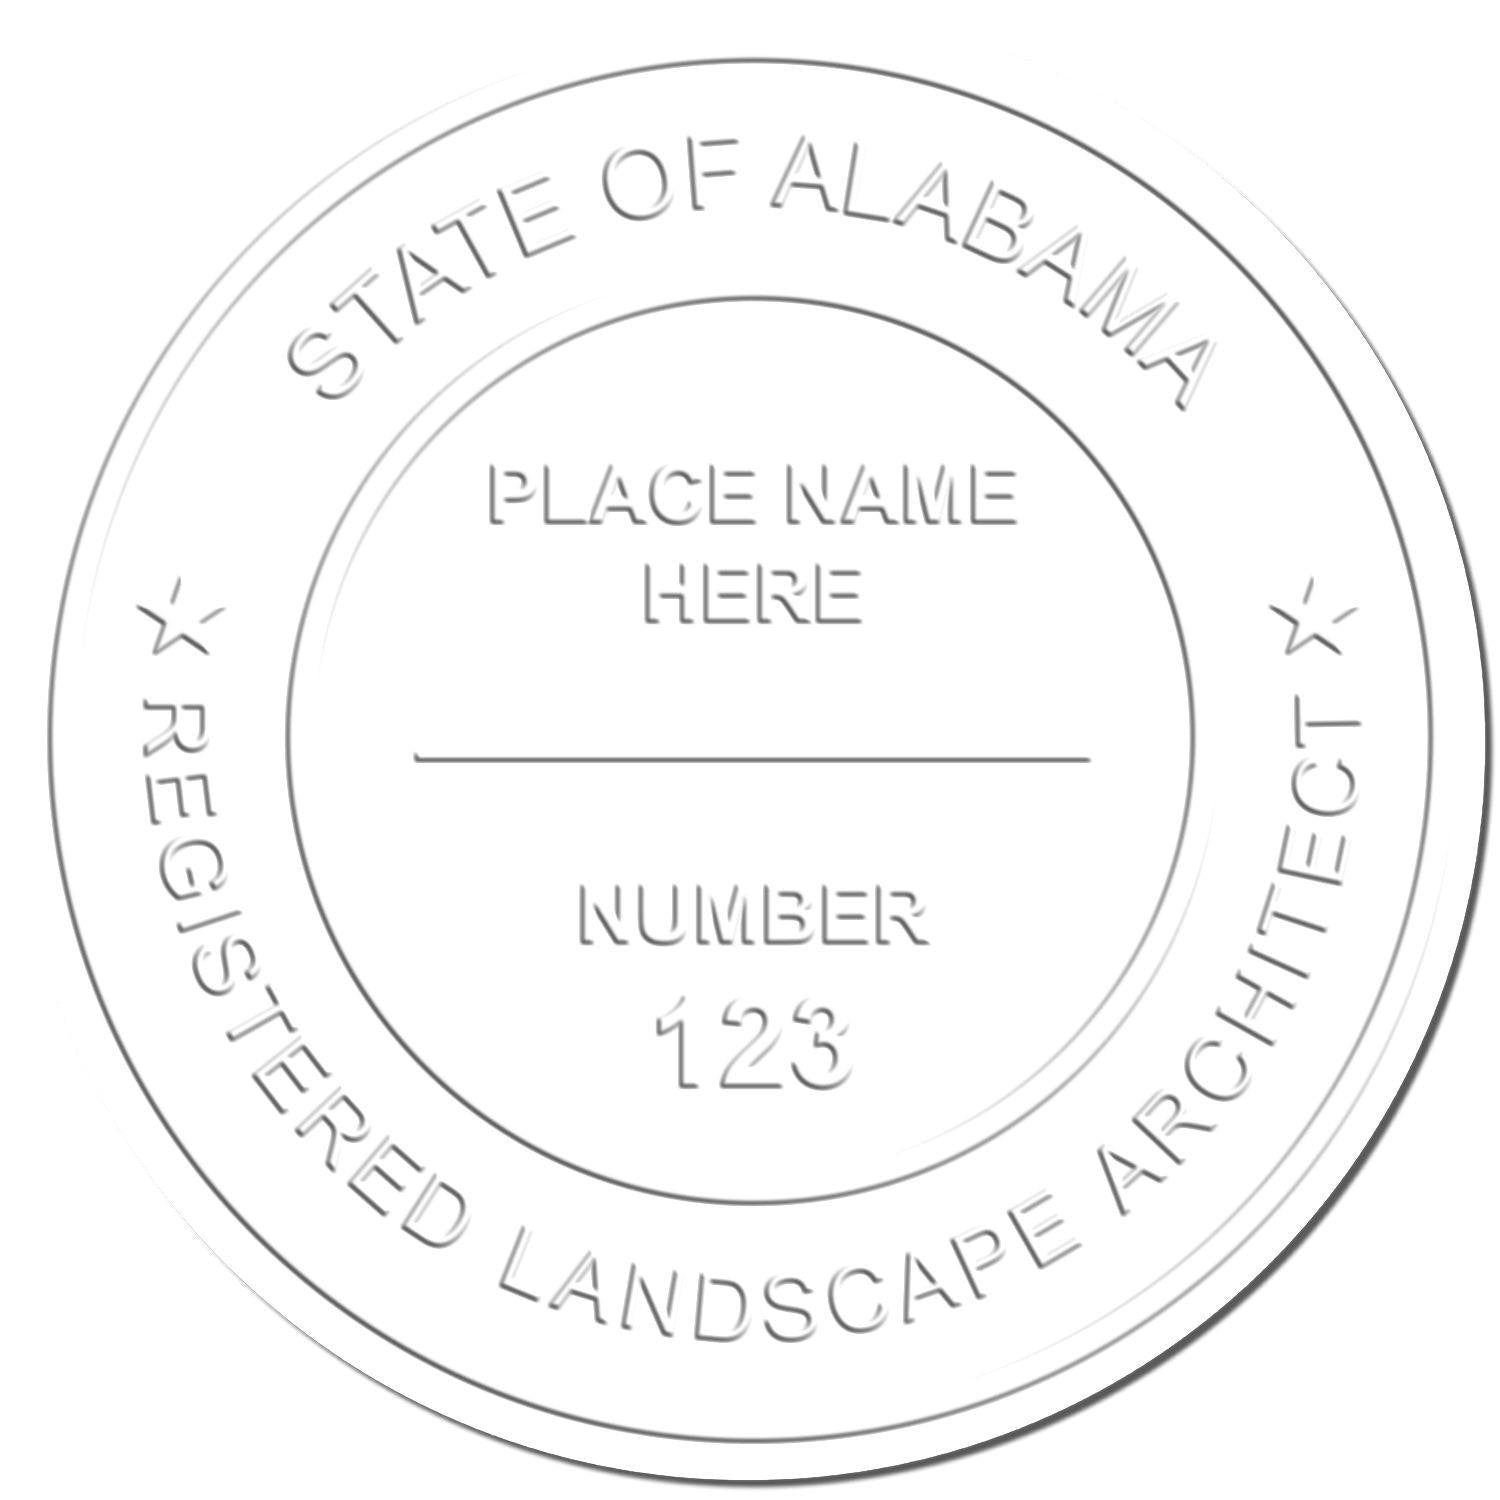 Landscape Architect Gold Gift Seal Embosser - Engineer Seal Stamps - Embosser Type_Desk, Embosser Type_Gift, Type of Use_Professional, validate-product-description